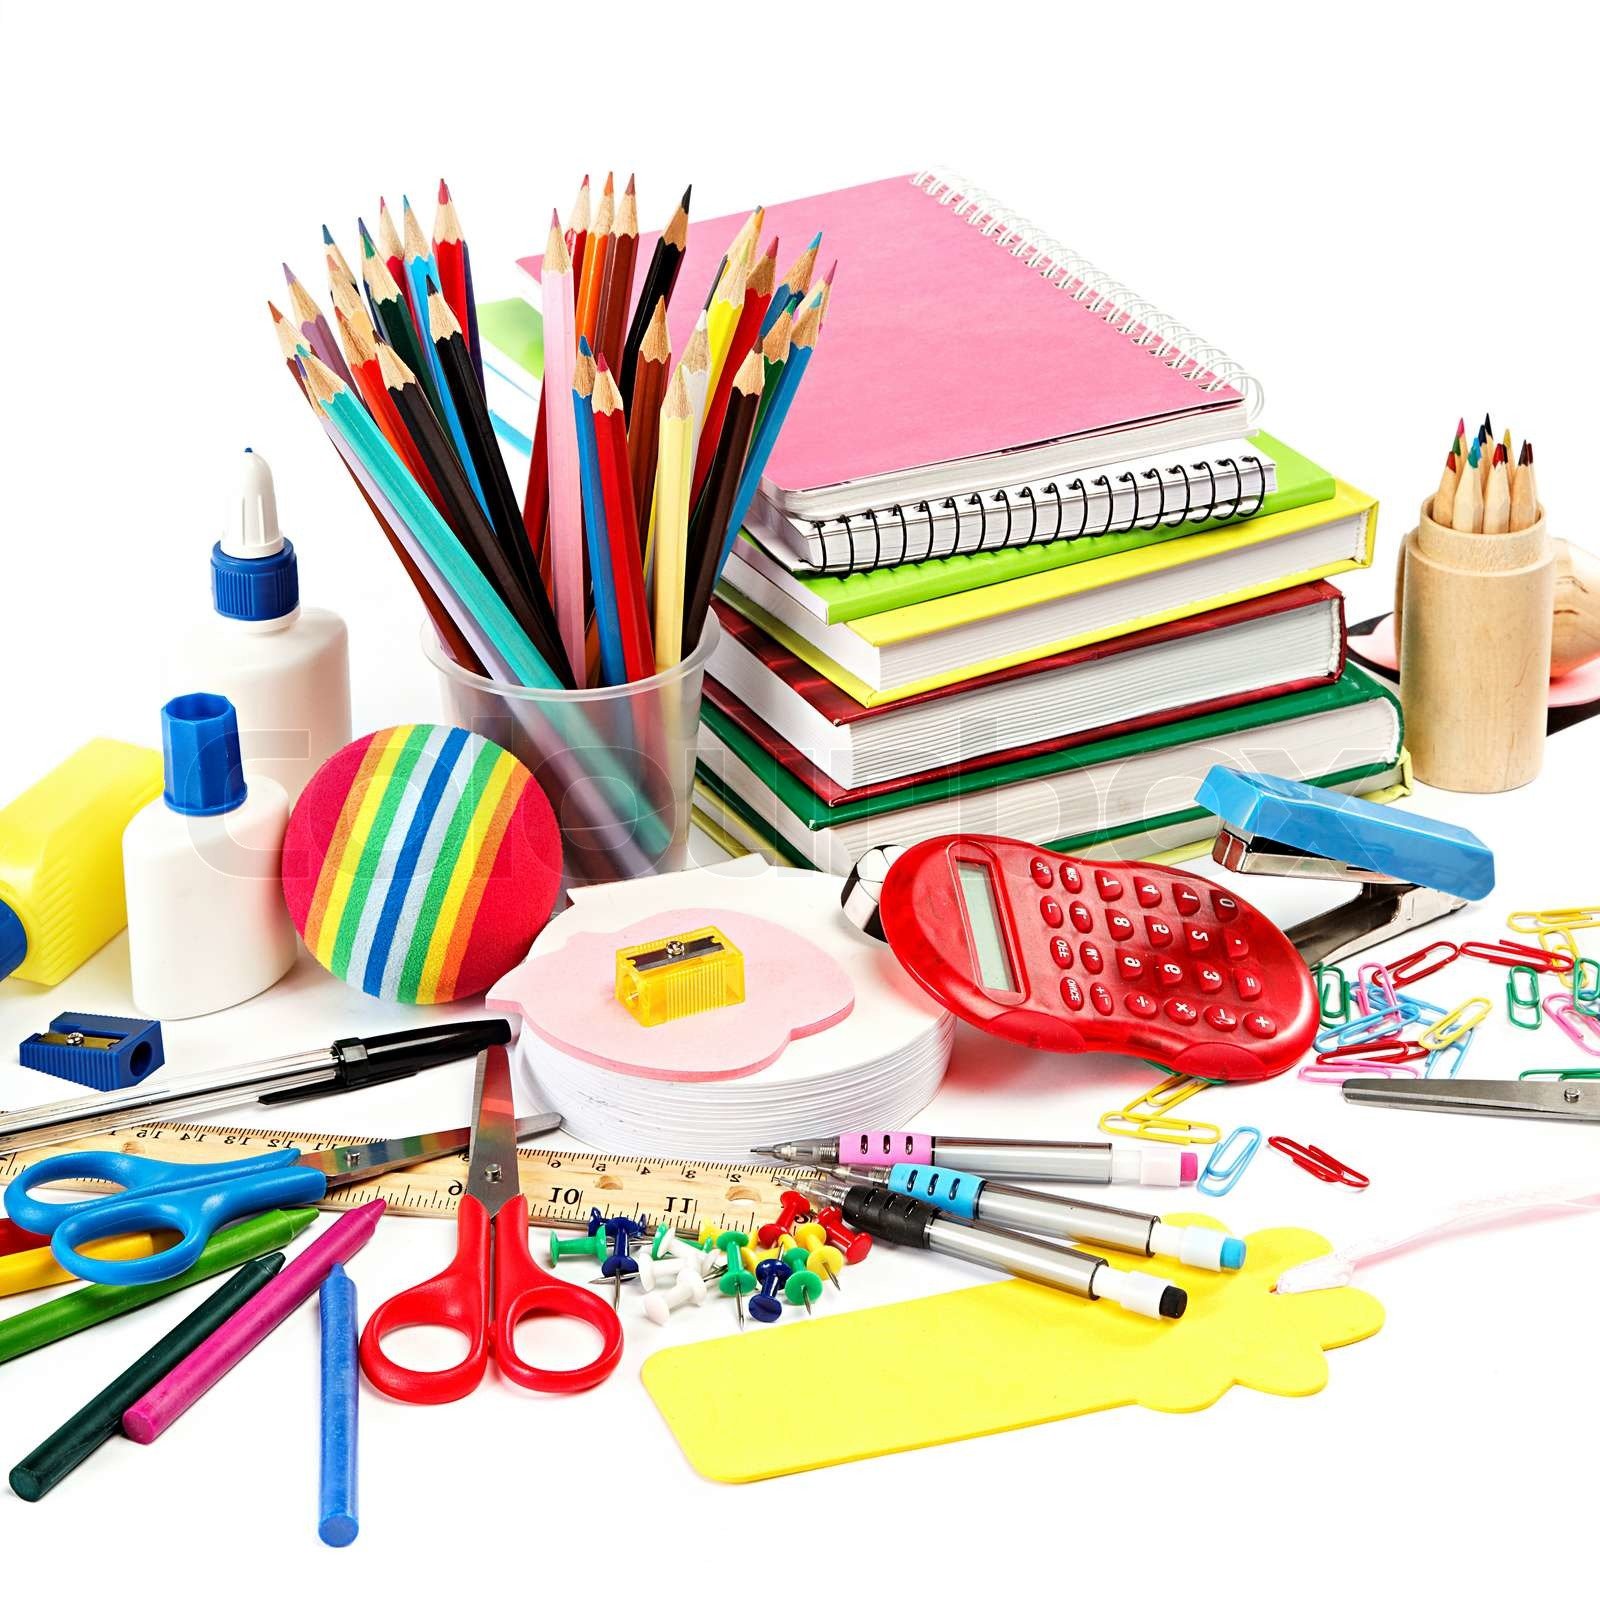 How to optimally manage your bulk office supplies - Stationery crew